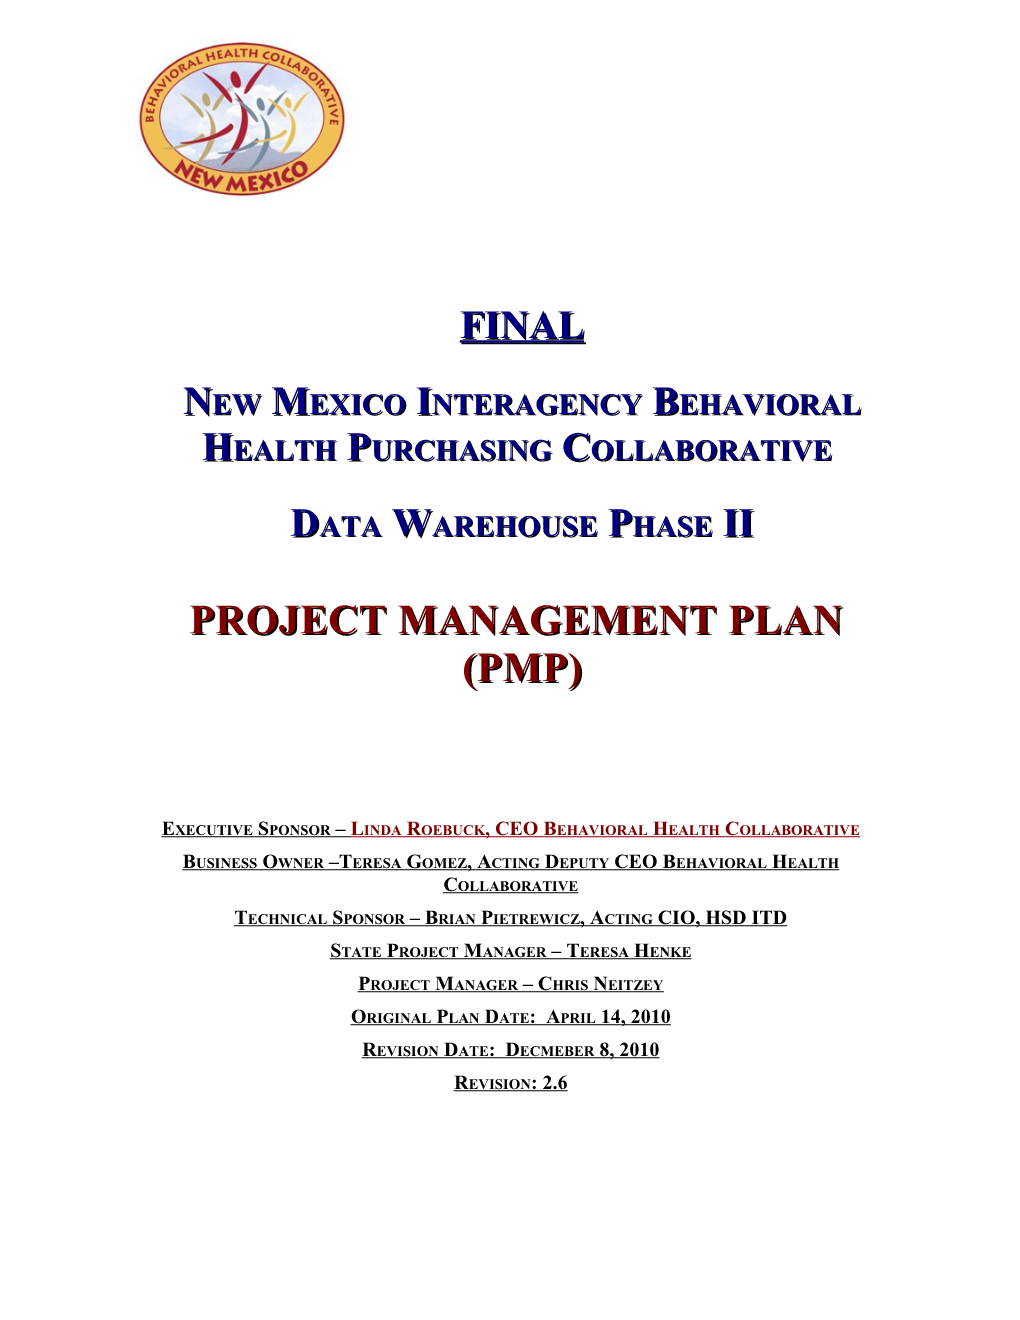 Project Charter:New Mexico Interagency Behavioral Health Purchasing Collaborative